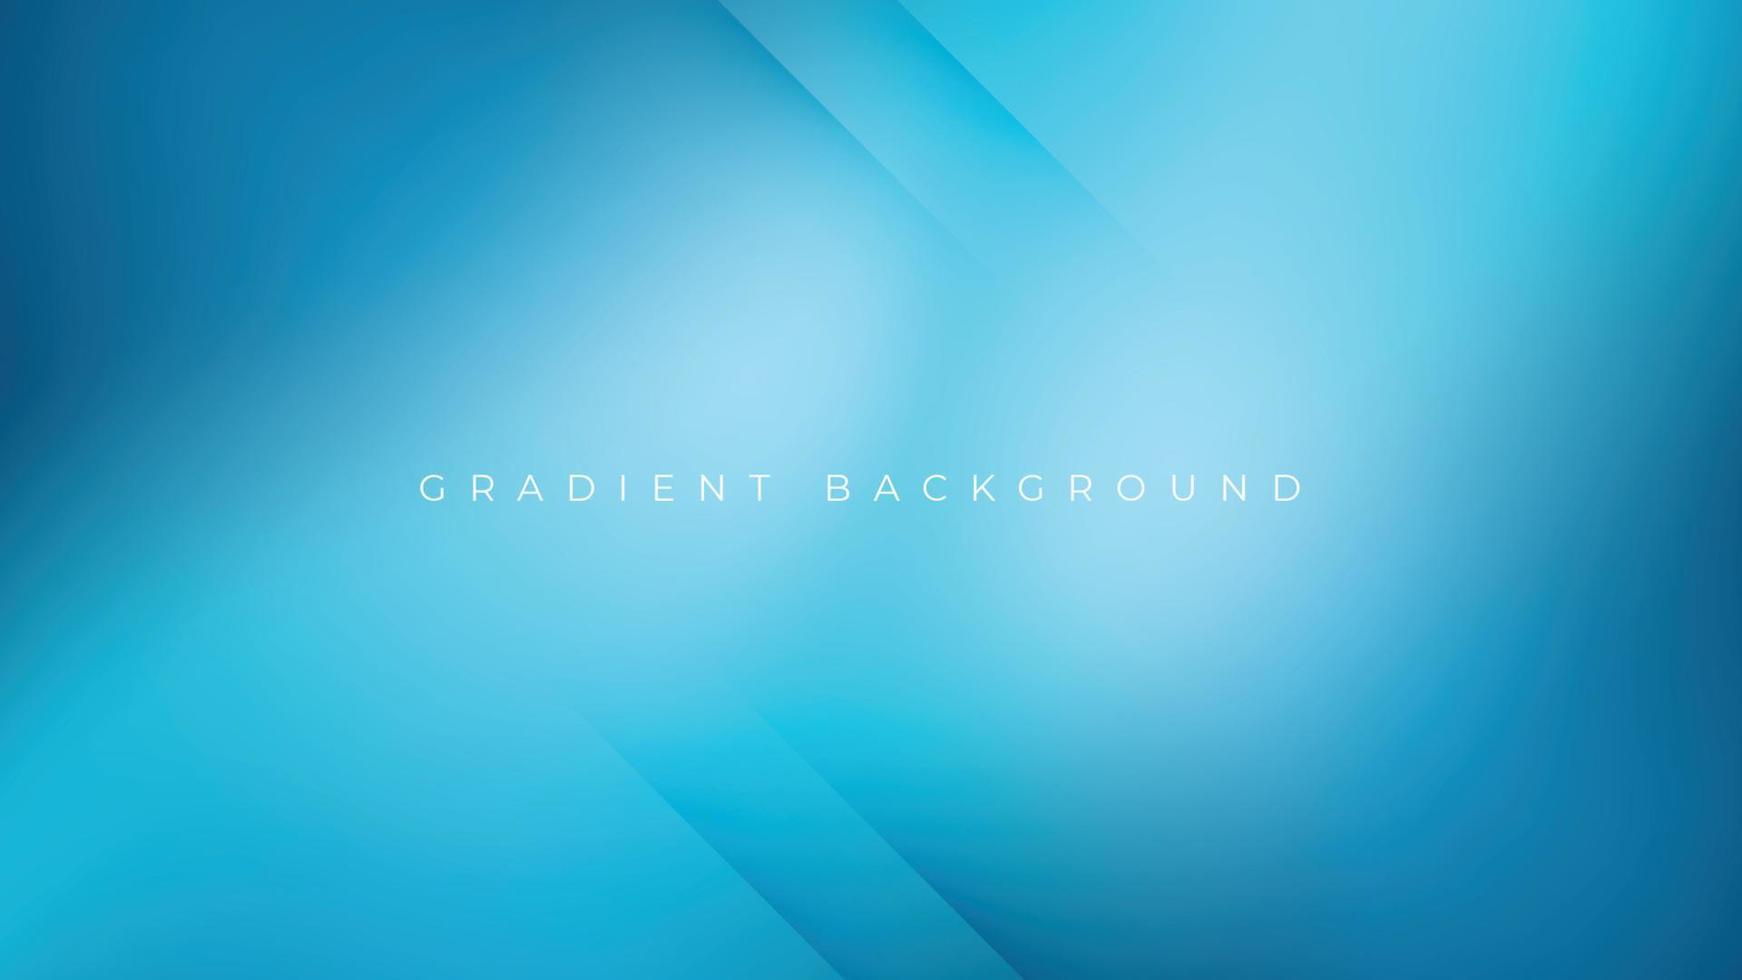 Abstract gradient blue background. Blurred gradient turquoise backdrop. Vector illustration